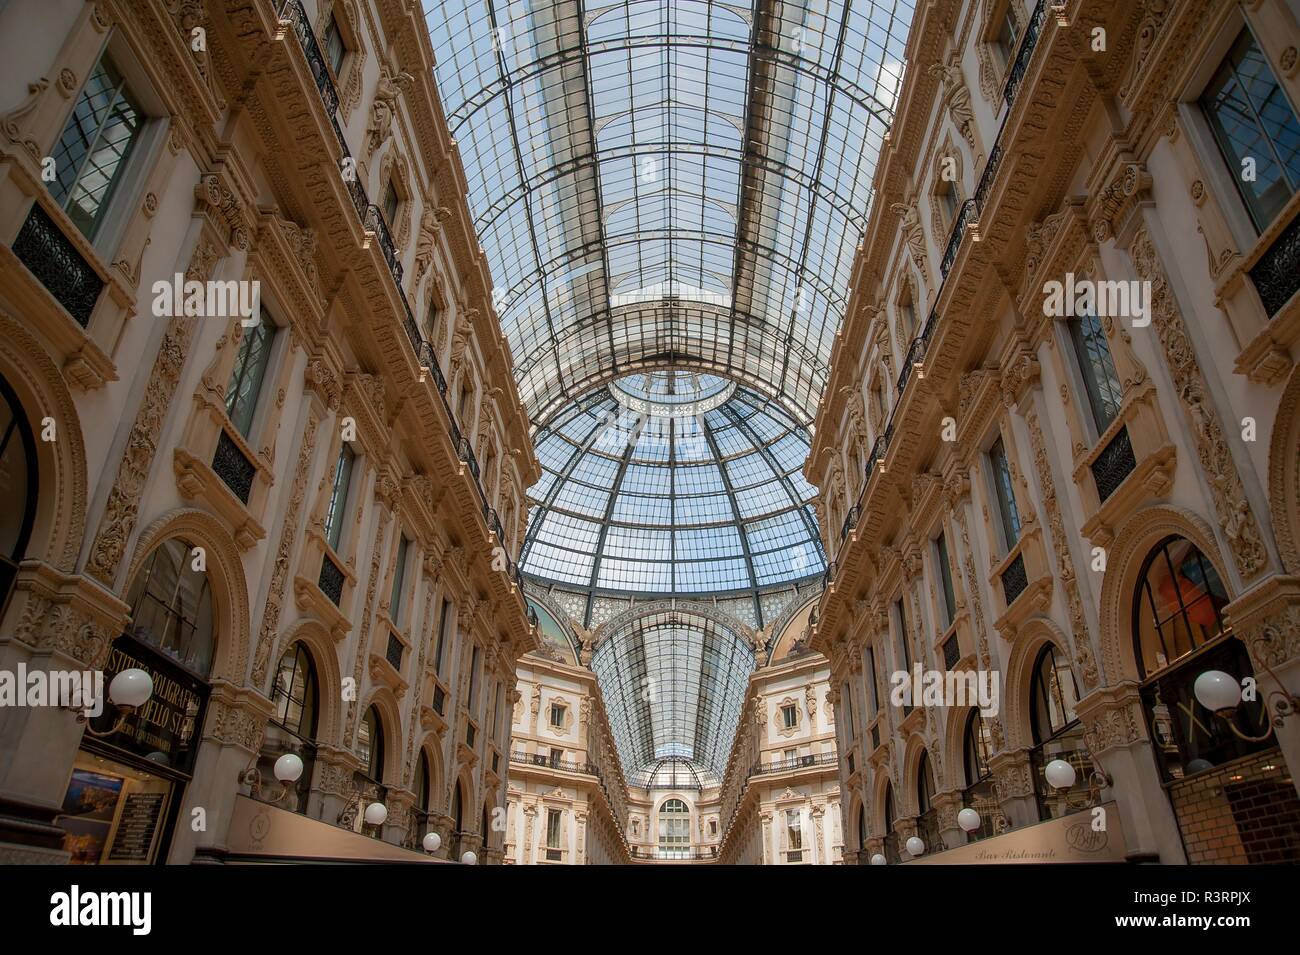 dome gallery in milan Stock Photo